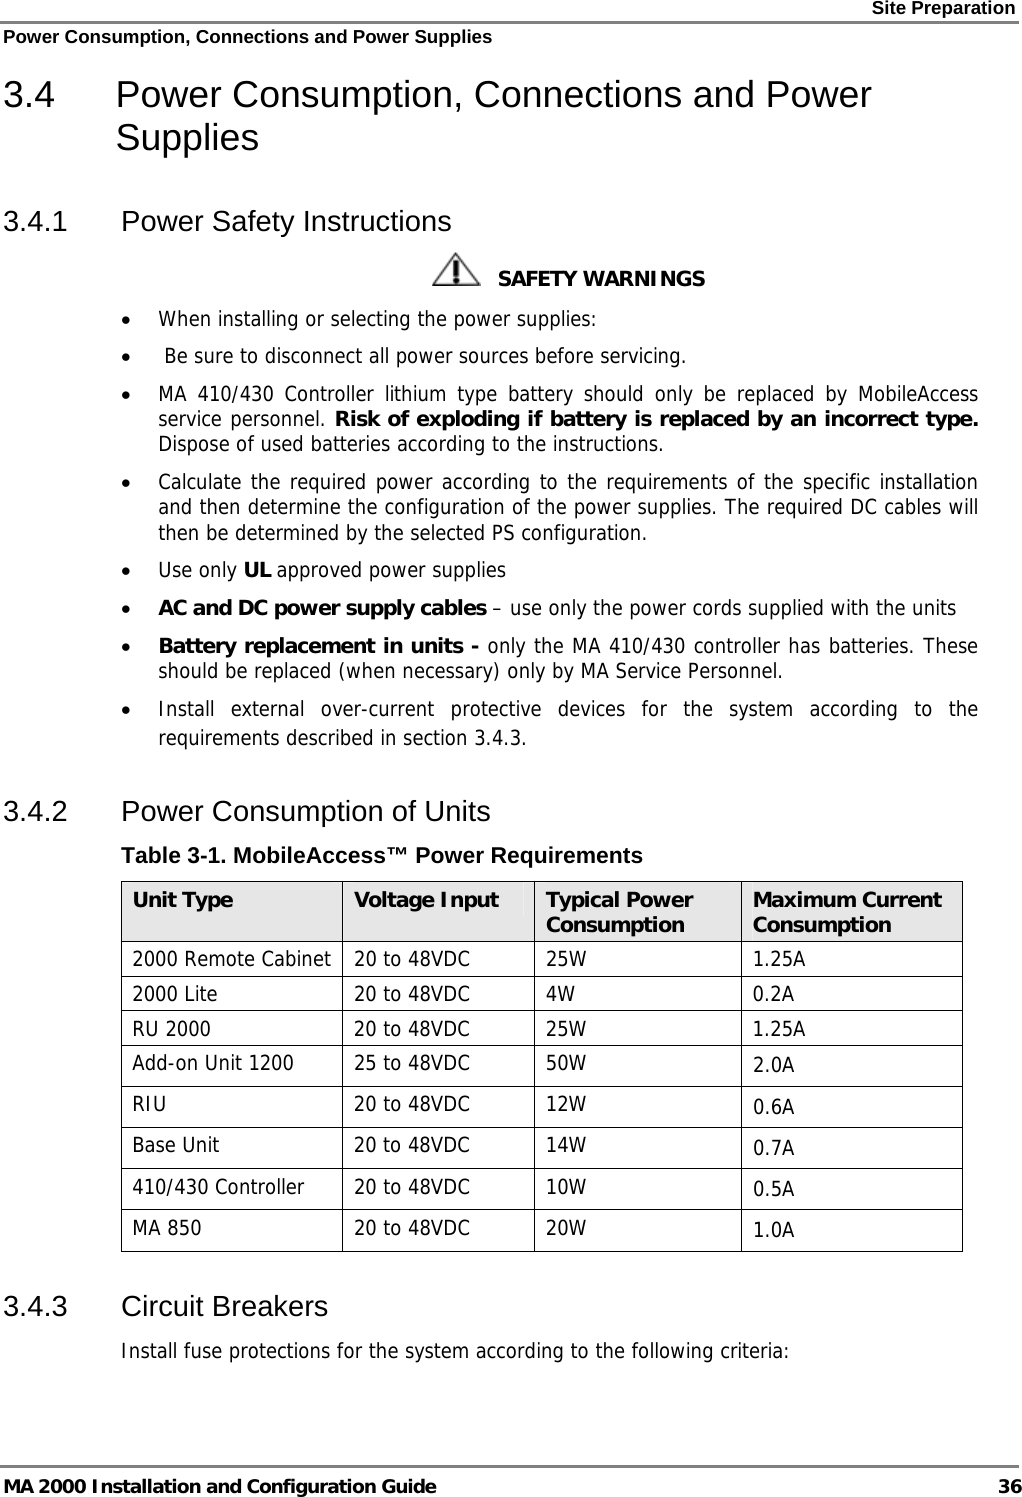 Site Preparation Power Consumption, Connections and Power Supplies MA 2000 Installation and Configuration Guide  36 3.4  Power Consumption, Connections and Power Supplies 3.4.1  Power Safety Instructions    SAFETY WARNINGS • When installing or selecting the power supplies:  •  Be sure to disconnect all power sources before servicing. • MA 410/430 Controller lithium type battery should only be replaced by MobileAccess service personnel. Risk of exploding if battery is replaced by an incorrect type. Dispose of used batteries according to the instructions. • Calculate the required power according to the requirements of the specific installation and then determine the configuration of the power supplies. The required DC cables will then be determined by the selected PS configuration. • Use only UL approved power supplies  • AC and DC power supply cables – use only the power cords supplied with the units  • Battery replacement in units - only the MA 410/430 controller has batteries. These should be replaced (when necessary) only by MA Service Personnel. • Install external over-current protective devices for the system according to the requirements described in section  3.4.3. 3.4.2  Power Consumption of Units Table  3-1. MobileAccess™ Power Requirements Unit Type  Voltage Input  Typical Power Consumption  Maximum Current Consumption 2000 Remote Cabinet   20 to 48VDC  25W  1.25A 2000 Lite  20 to 48VDC  4W  0.2A RU 2000  20 to 48VDC  25W  1.25A Add-on Unit 1200  25 to 48VDC  50W  2.0A RIU  20 to 48VDC  12W  0.6A Base Unit  20 to 48VDC  14W  0.7A 410/430 Controller  20 to 48VDC  10W  0.5A MA 850  20 to 48VDC  20W  1.0A 3.4.3 Circuit Breakers Install fuse protections for the system according to the following criteria:  